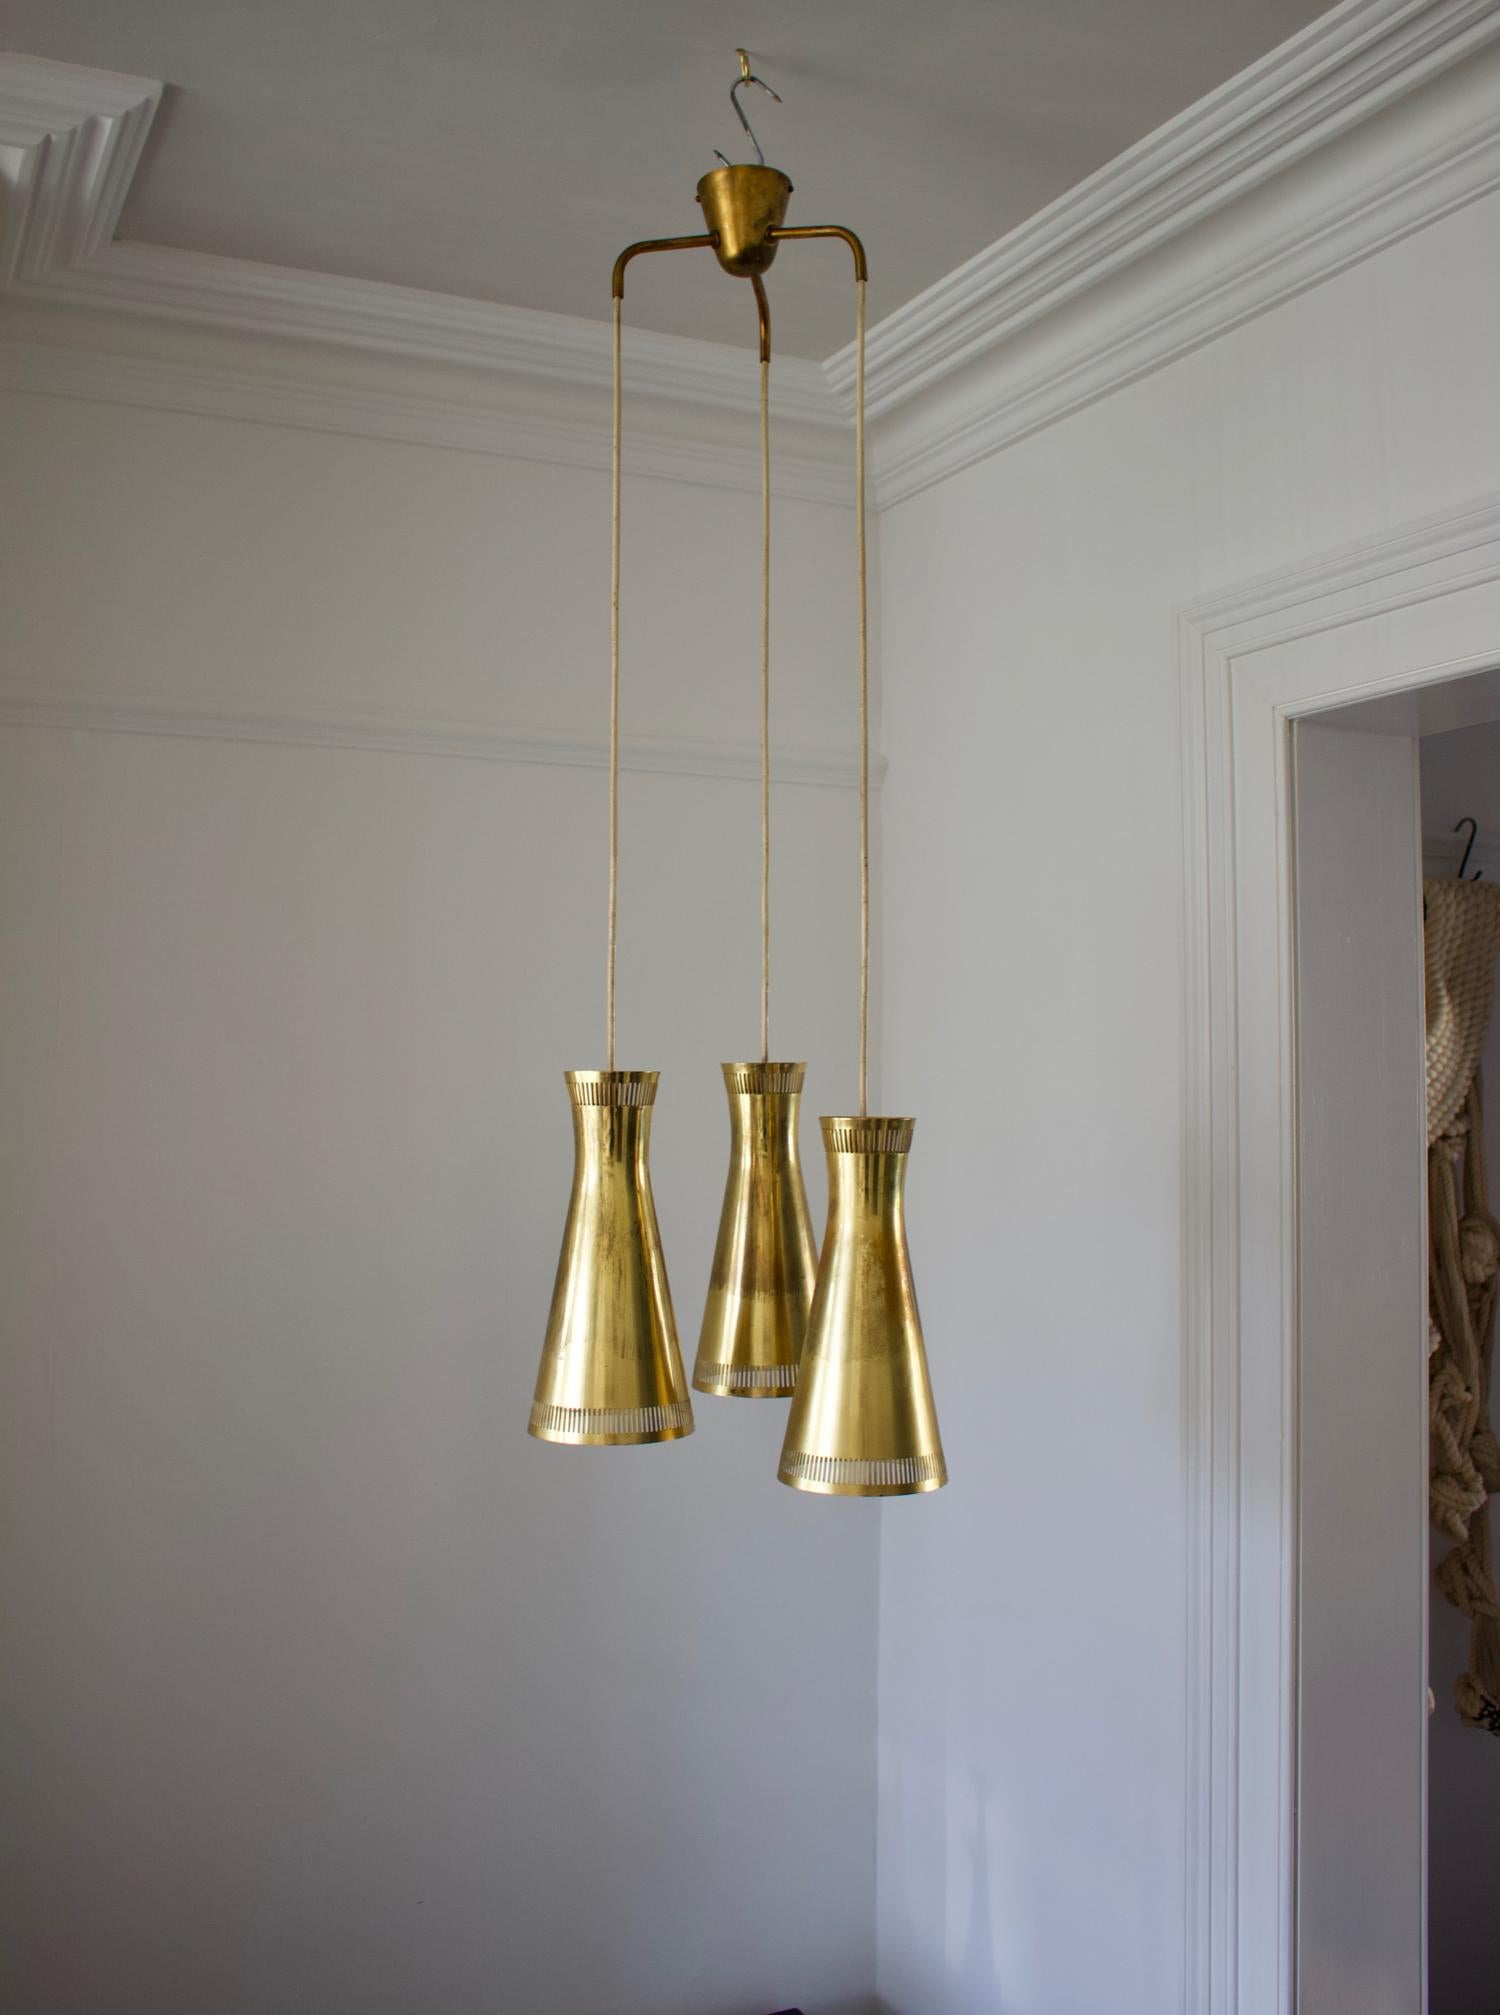 Brass chandelier by Itsu of Finland. Mid-20th century.

A high-quality cascading chandelier featuring three shades made of brass - white on the inside - arranged at different heights. The original ceiling canopy is in place and the fixture has the